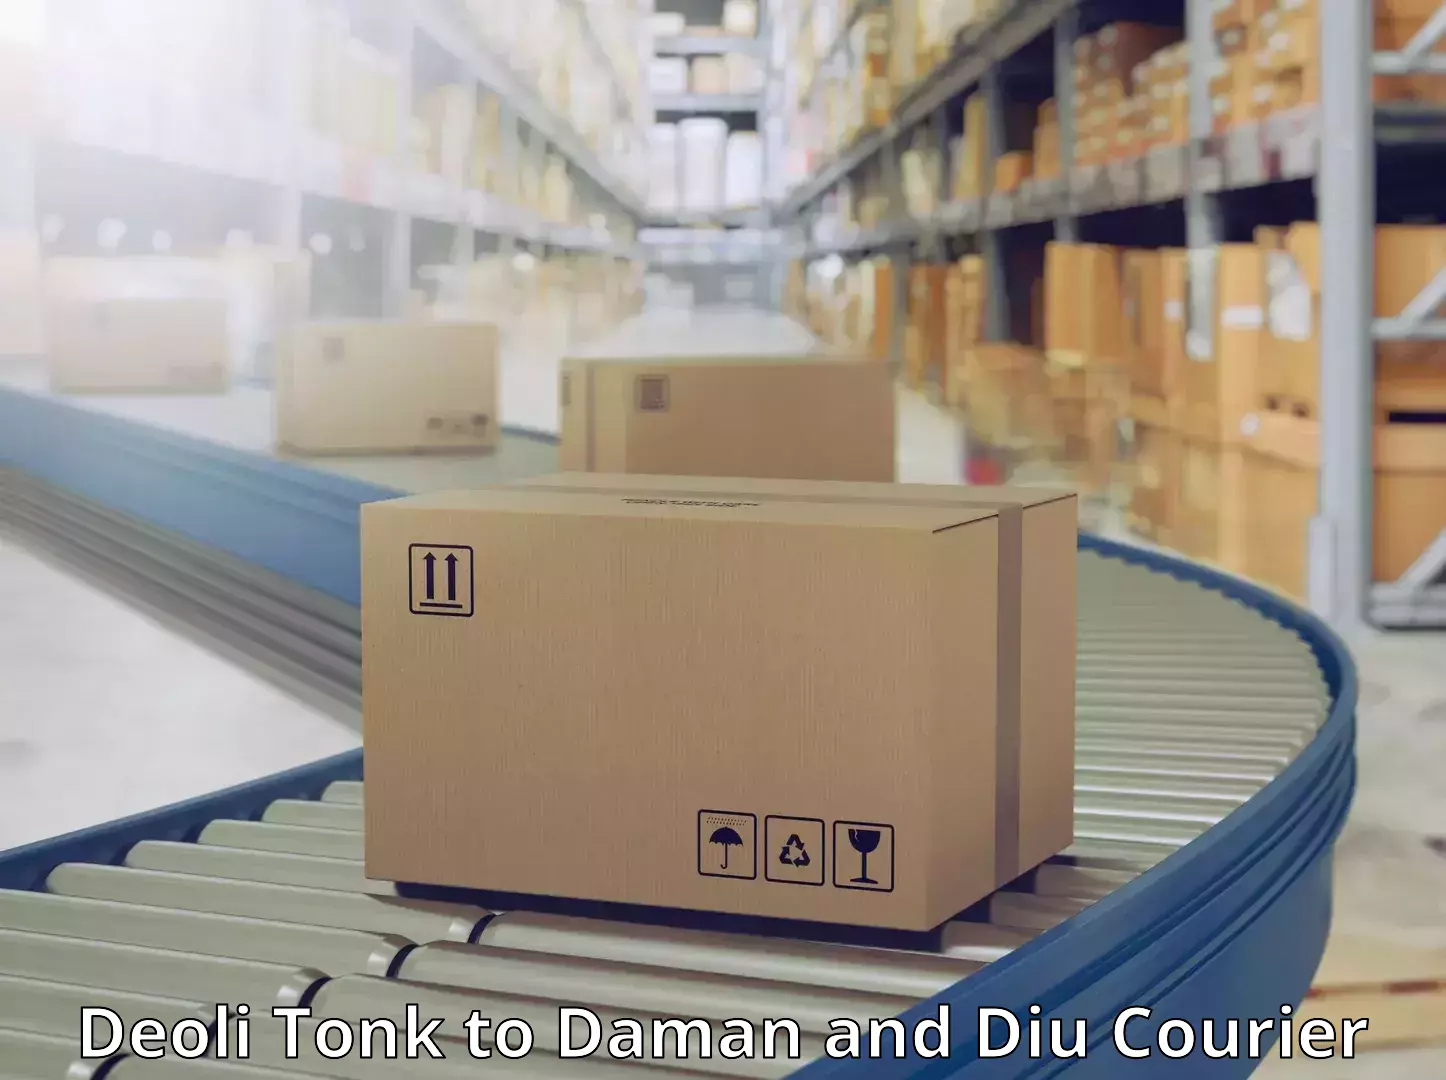 Advanced shipping services Deoli Tonk to Daman and Diu